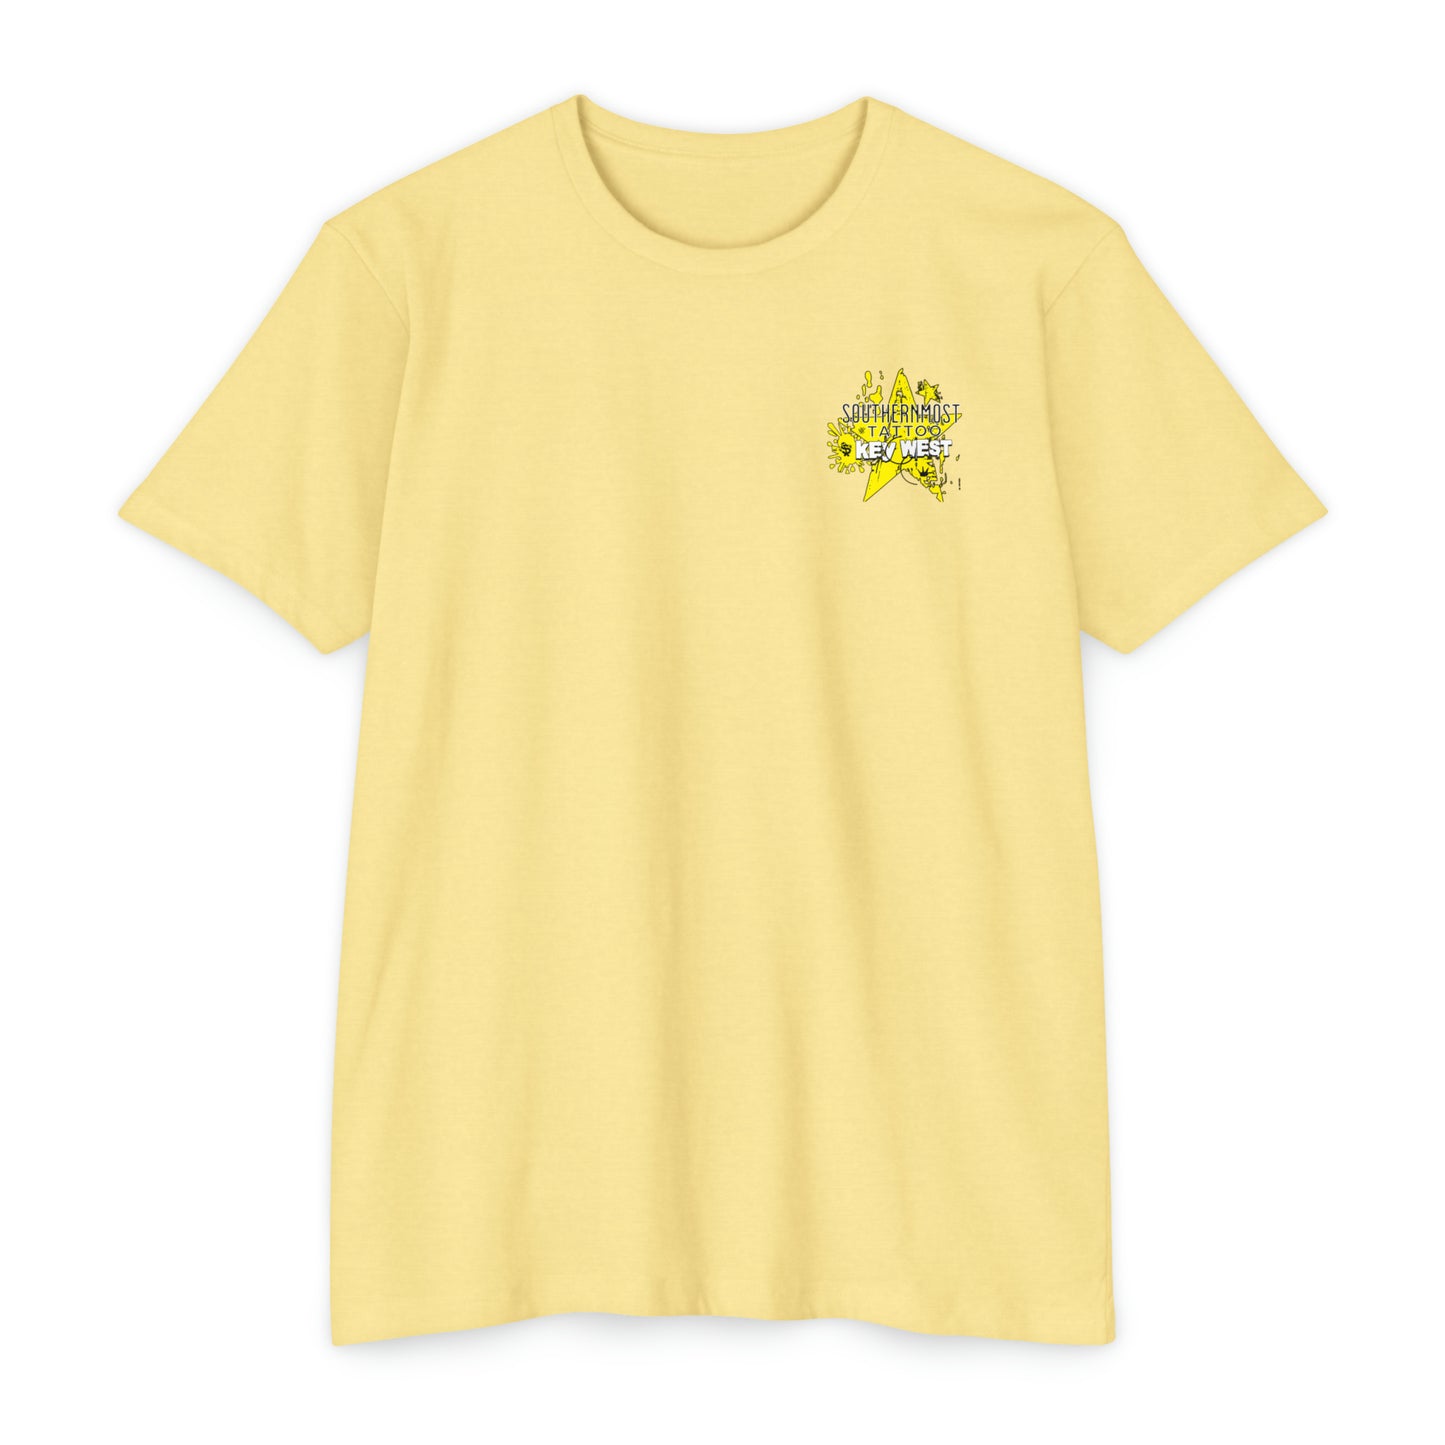 Southernmost Tattoo Key West Classic T-shirt